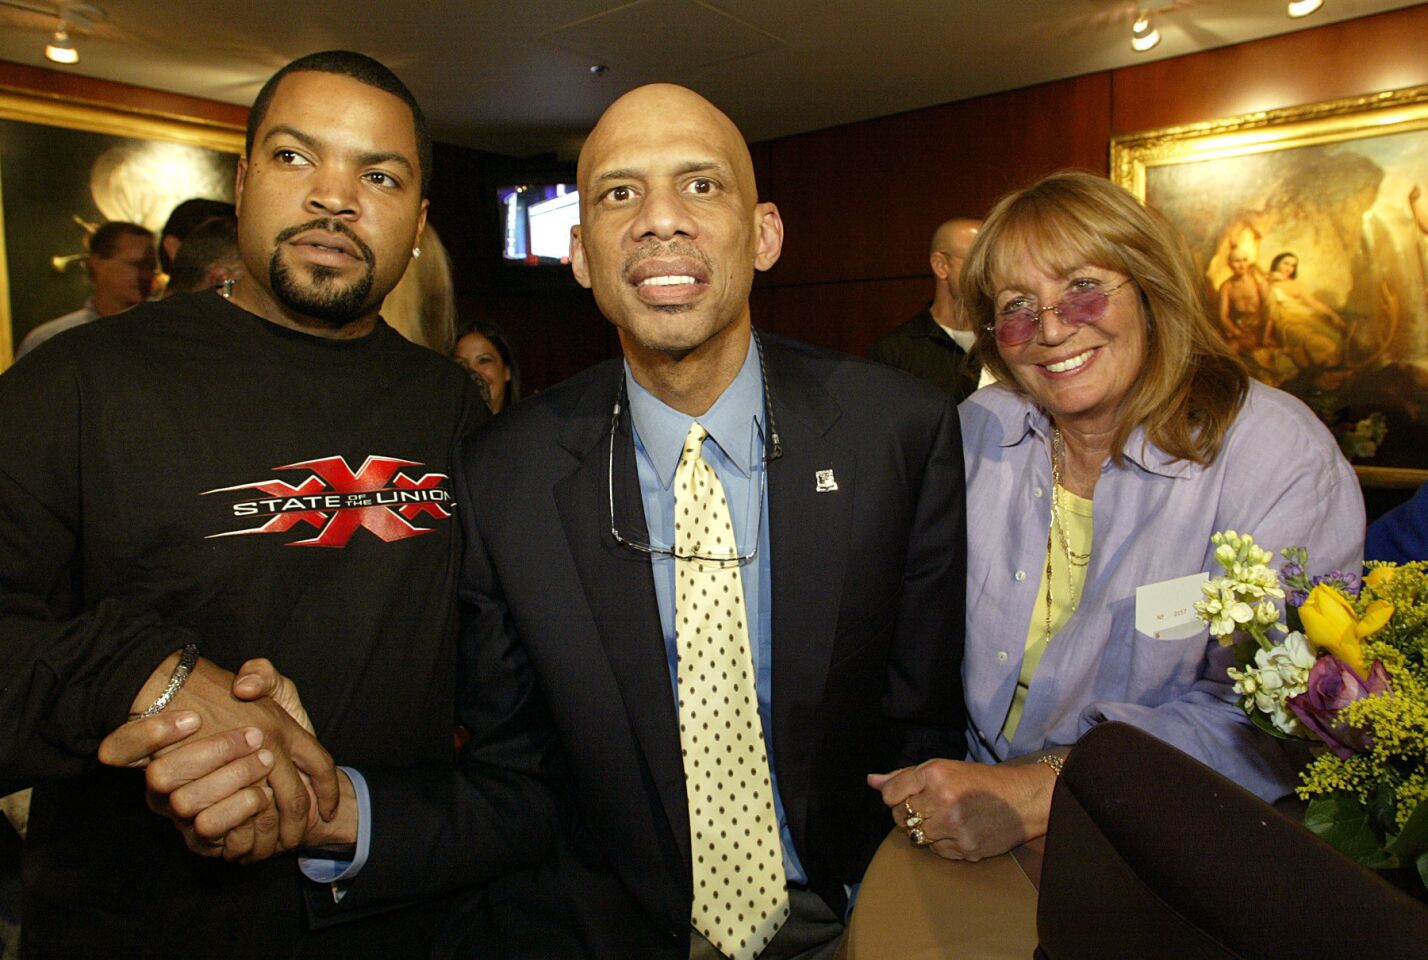 Penny Marshall, a longtime Lakers fan, and Ice Cube were among those on hand at Staples Center for the 2005 celebration of the 1985 championship Lakers team, which included Kareem Abdul-Jabbar, center.